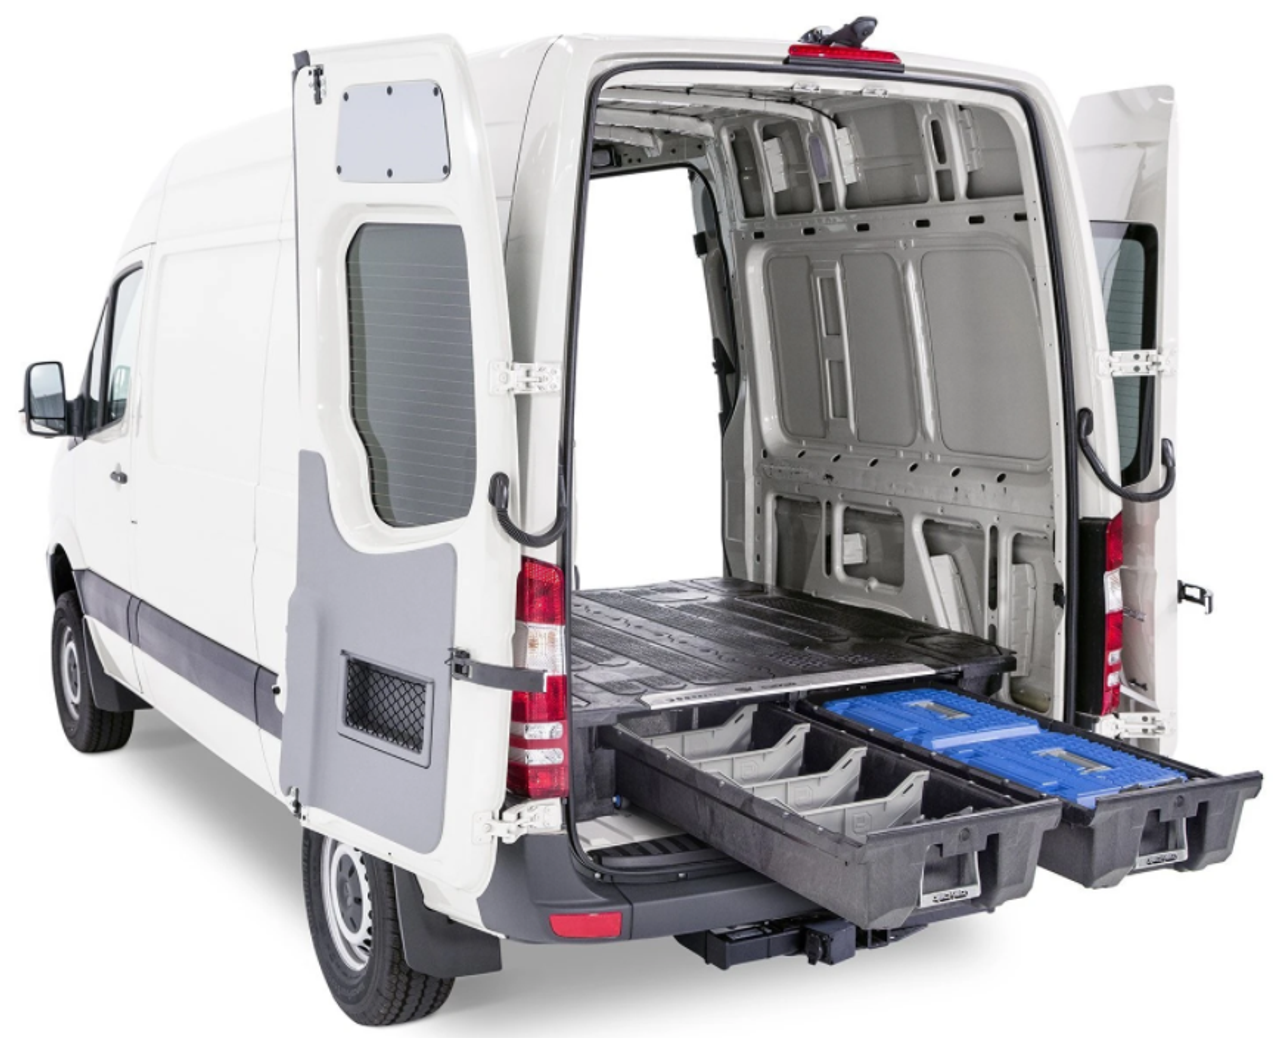 Pre-Configured Storage Systems for your Van